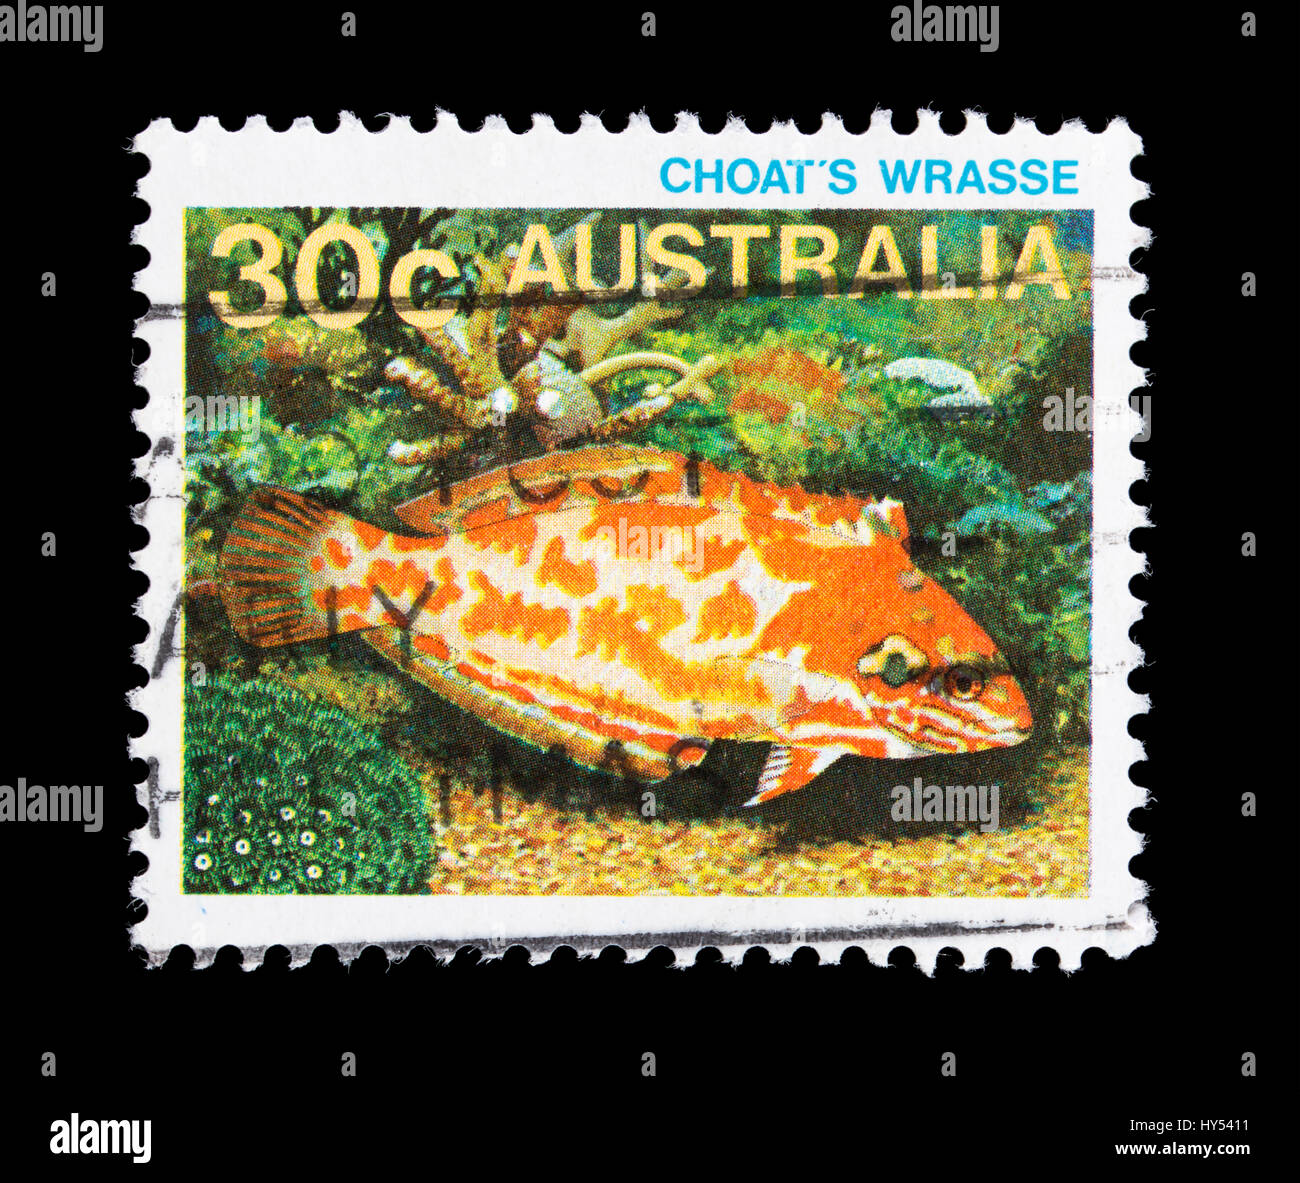 Postage stamp from Australia depicting a choat's wrasse (Macropharyngodon choati) Stock Photo